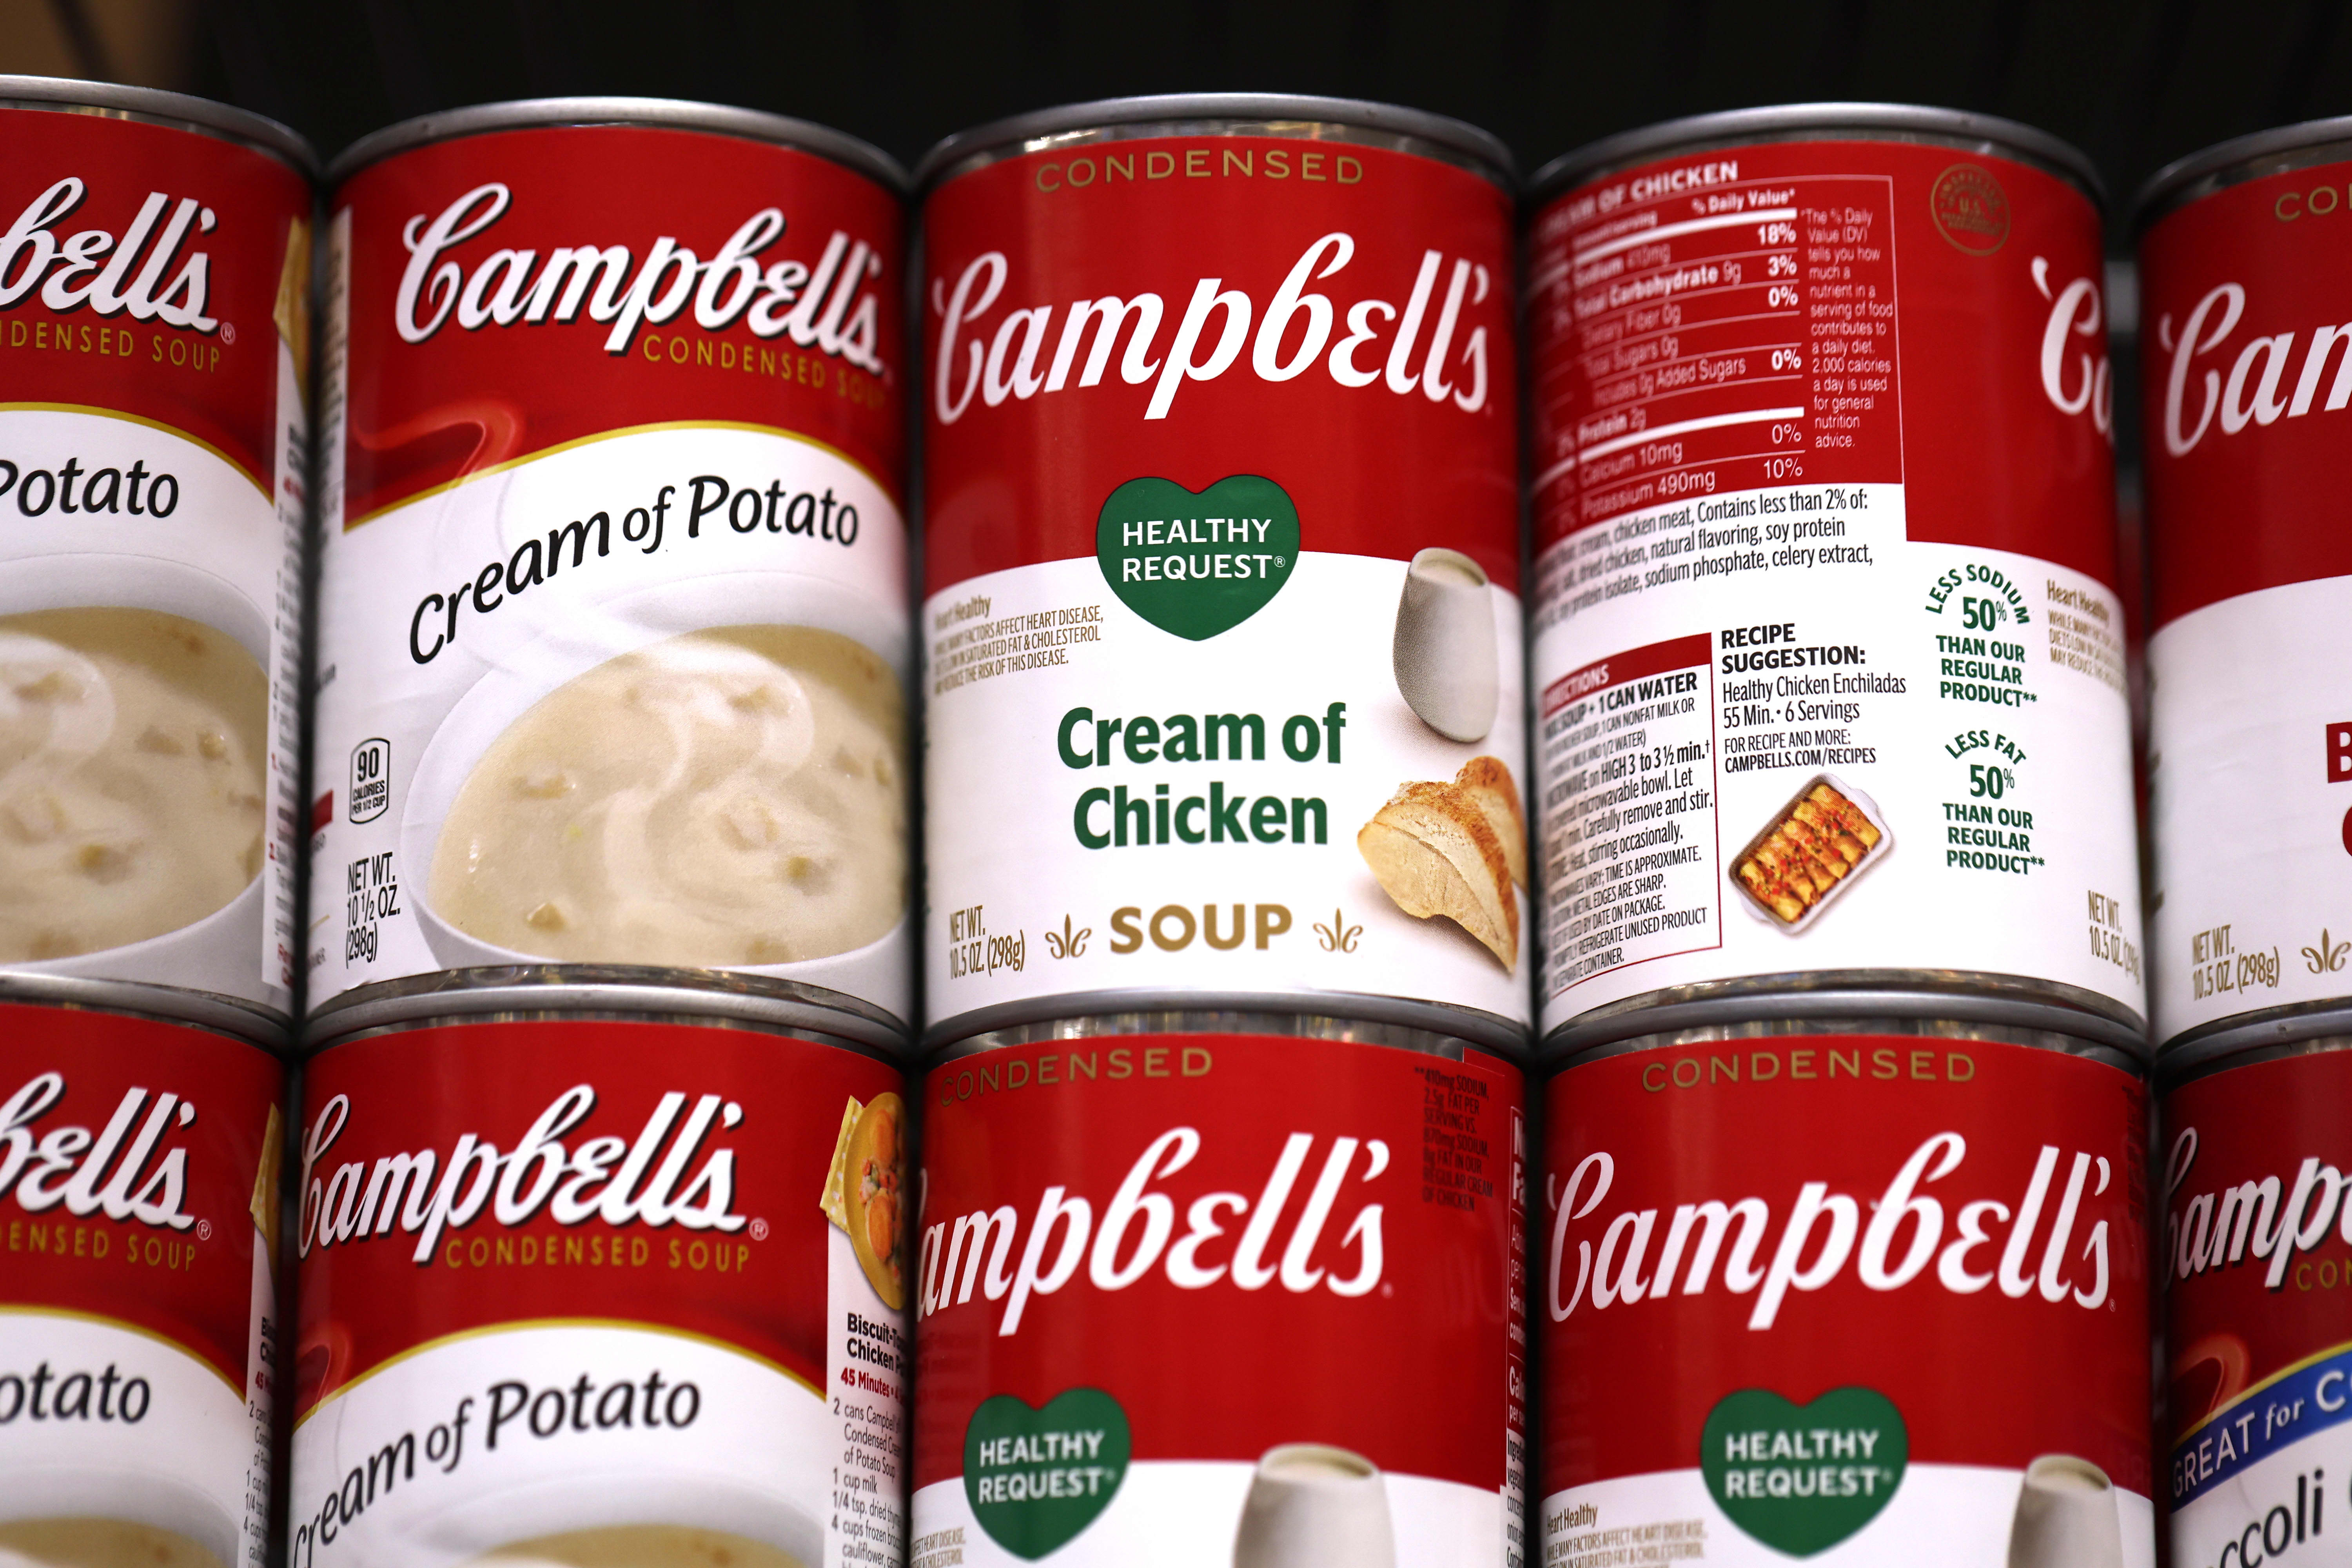 Campbell Soup CEO is confident that condensed products can turn a profit